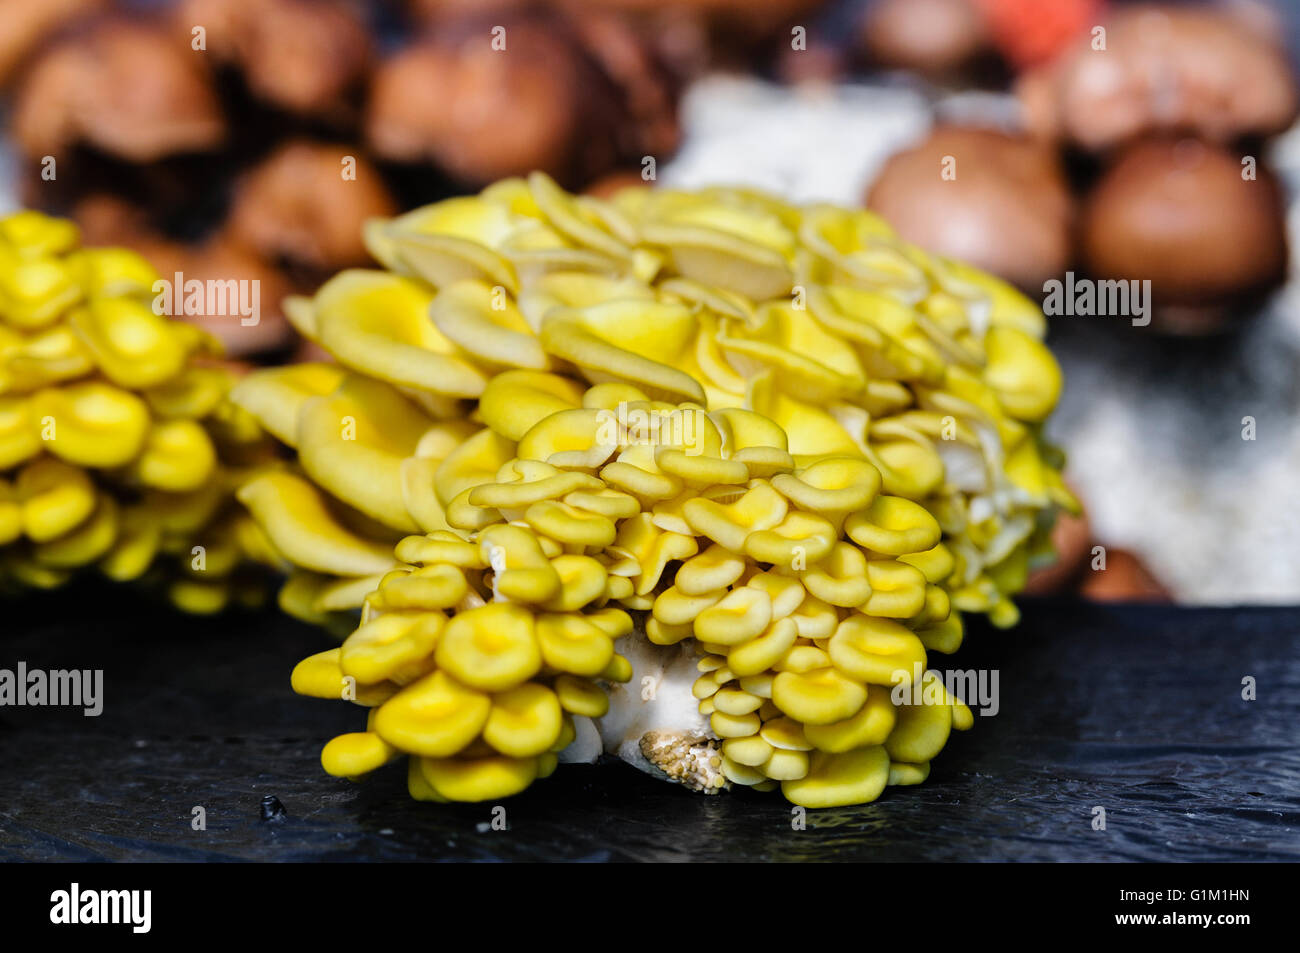 Pleurotus cornicopiae (Golden Oysters) comprising clusters of small to medium size yellow edible mushrooms. Stock Photo